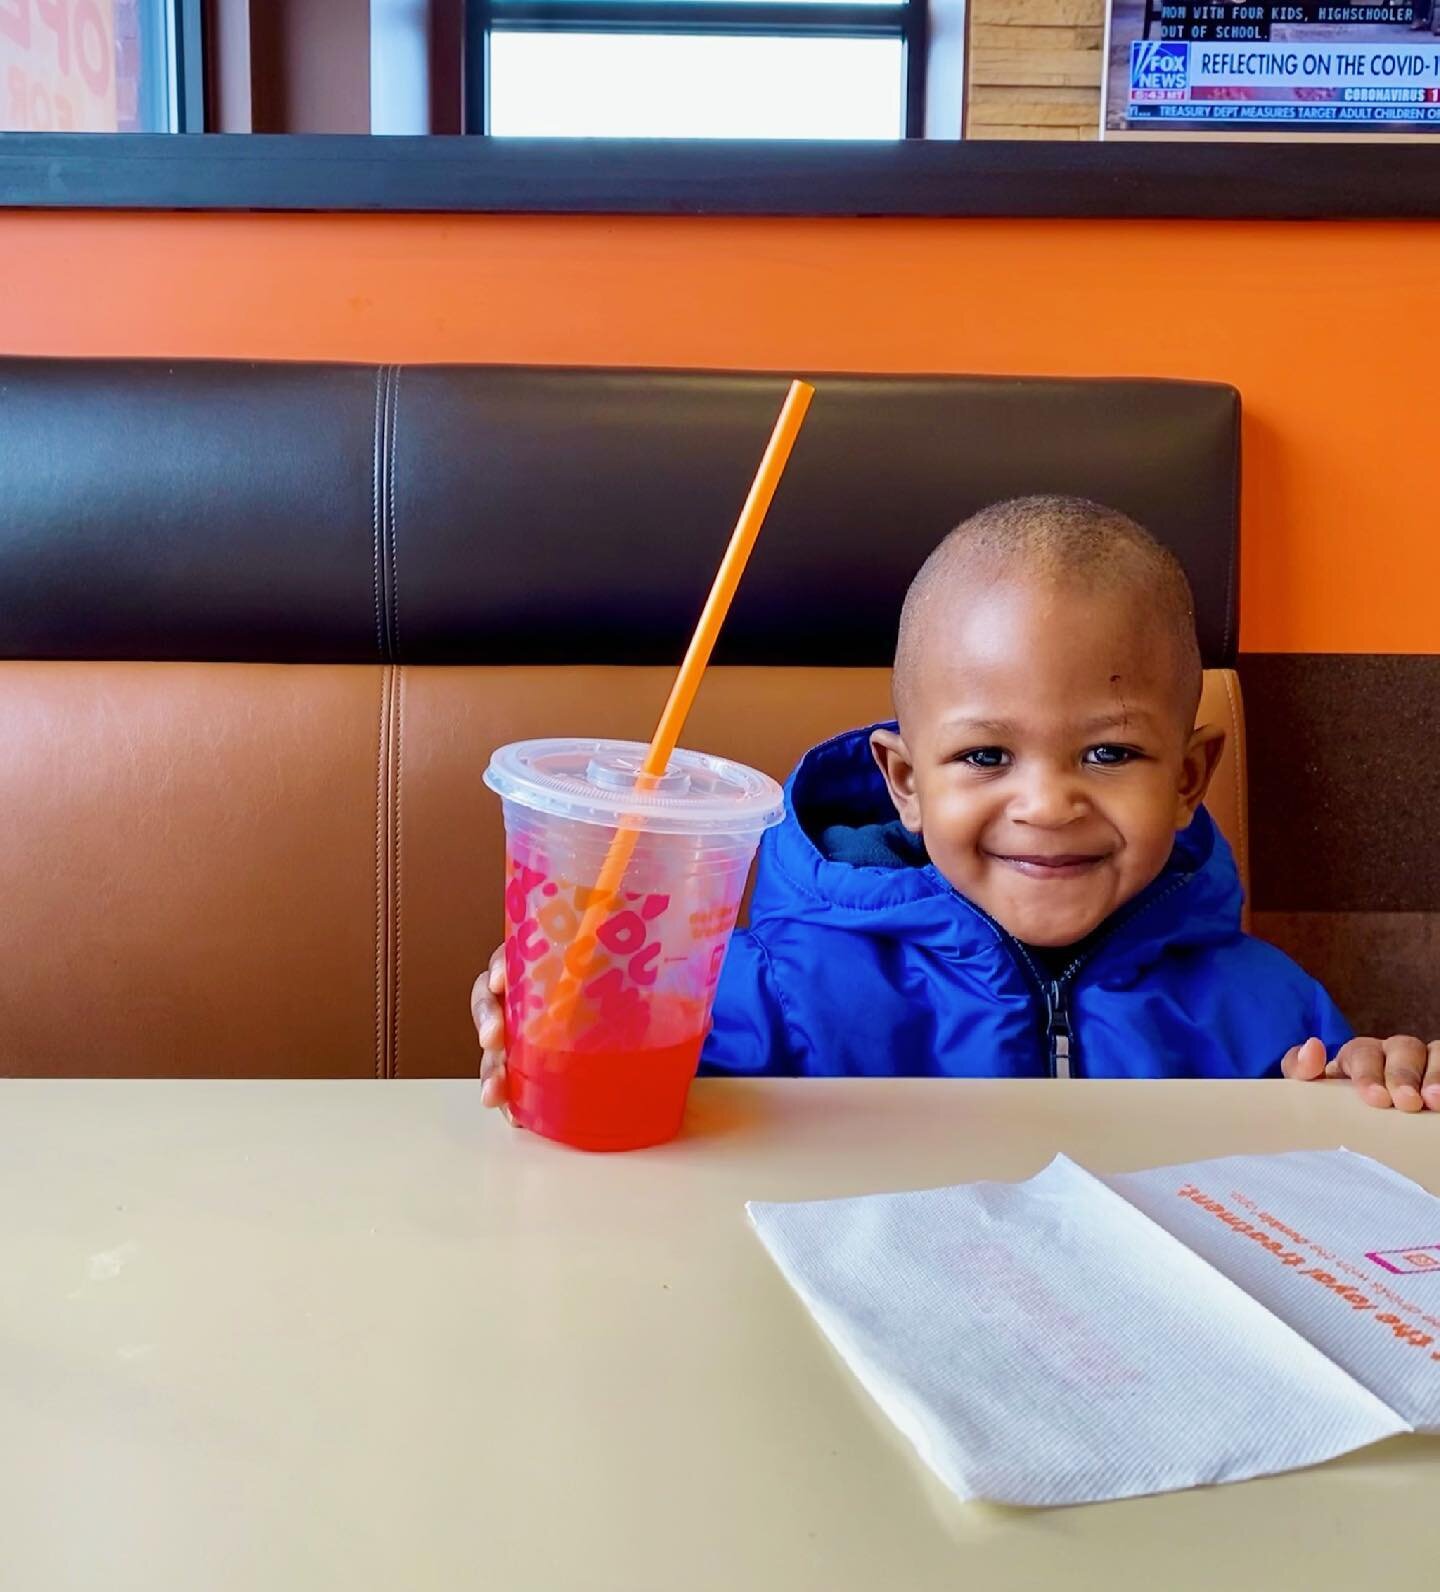 My kids are happy, therefore I am happy. This mama runs on dunkin. This is not an ad 😅. #dunkindonuts #dunkin

Happy Thursday ☀️ 

.
.
.
.
.
.
.
.
#bloggerlife #bloggersgetsocial #thehappynow #lifestyleblog #momblog #mommylife #parentingblogger #mom